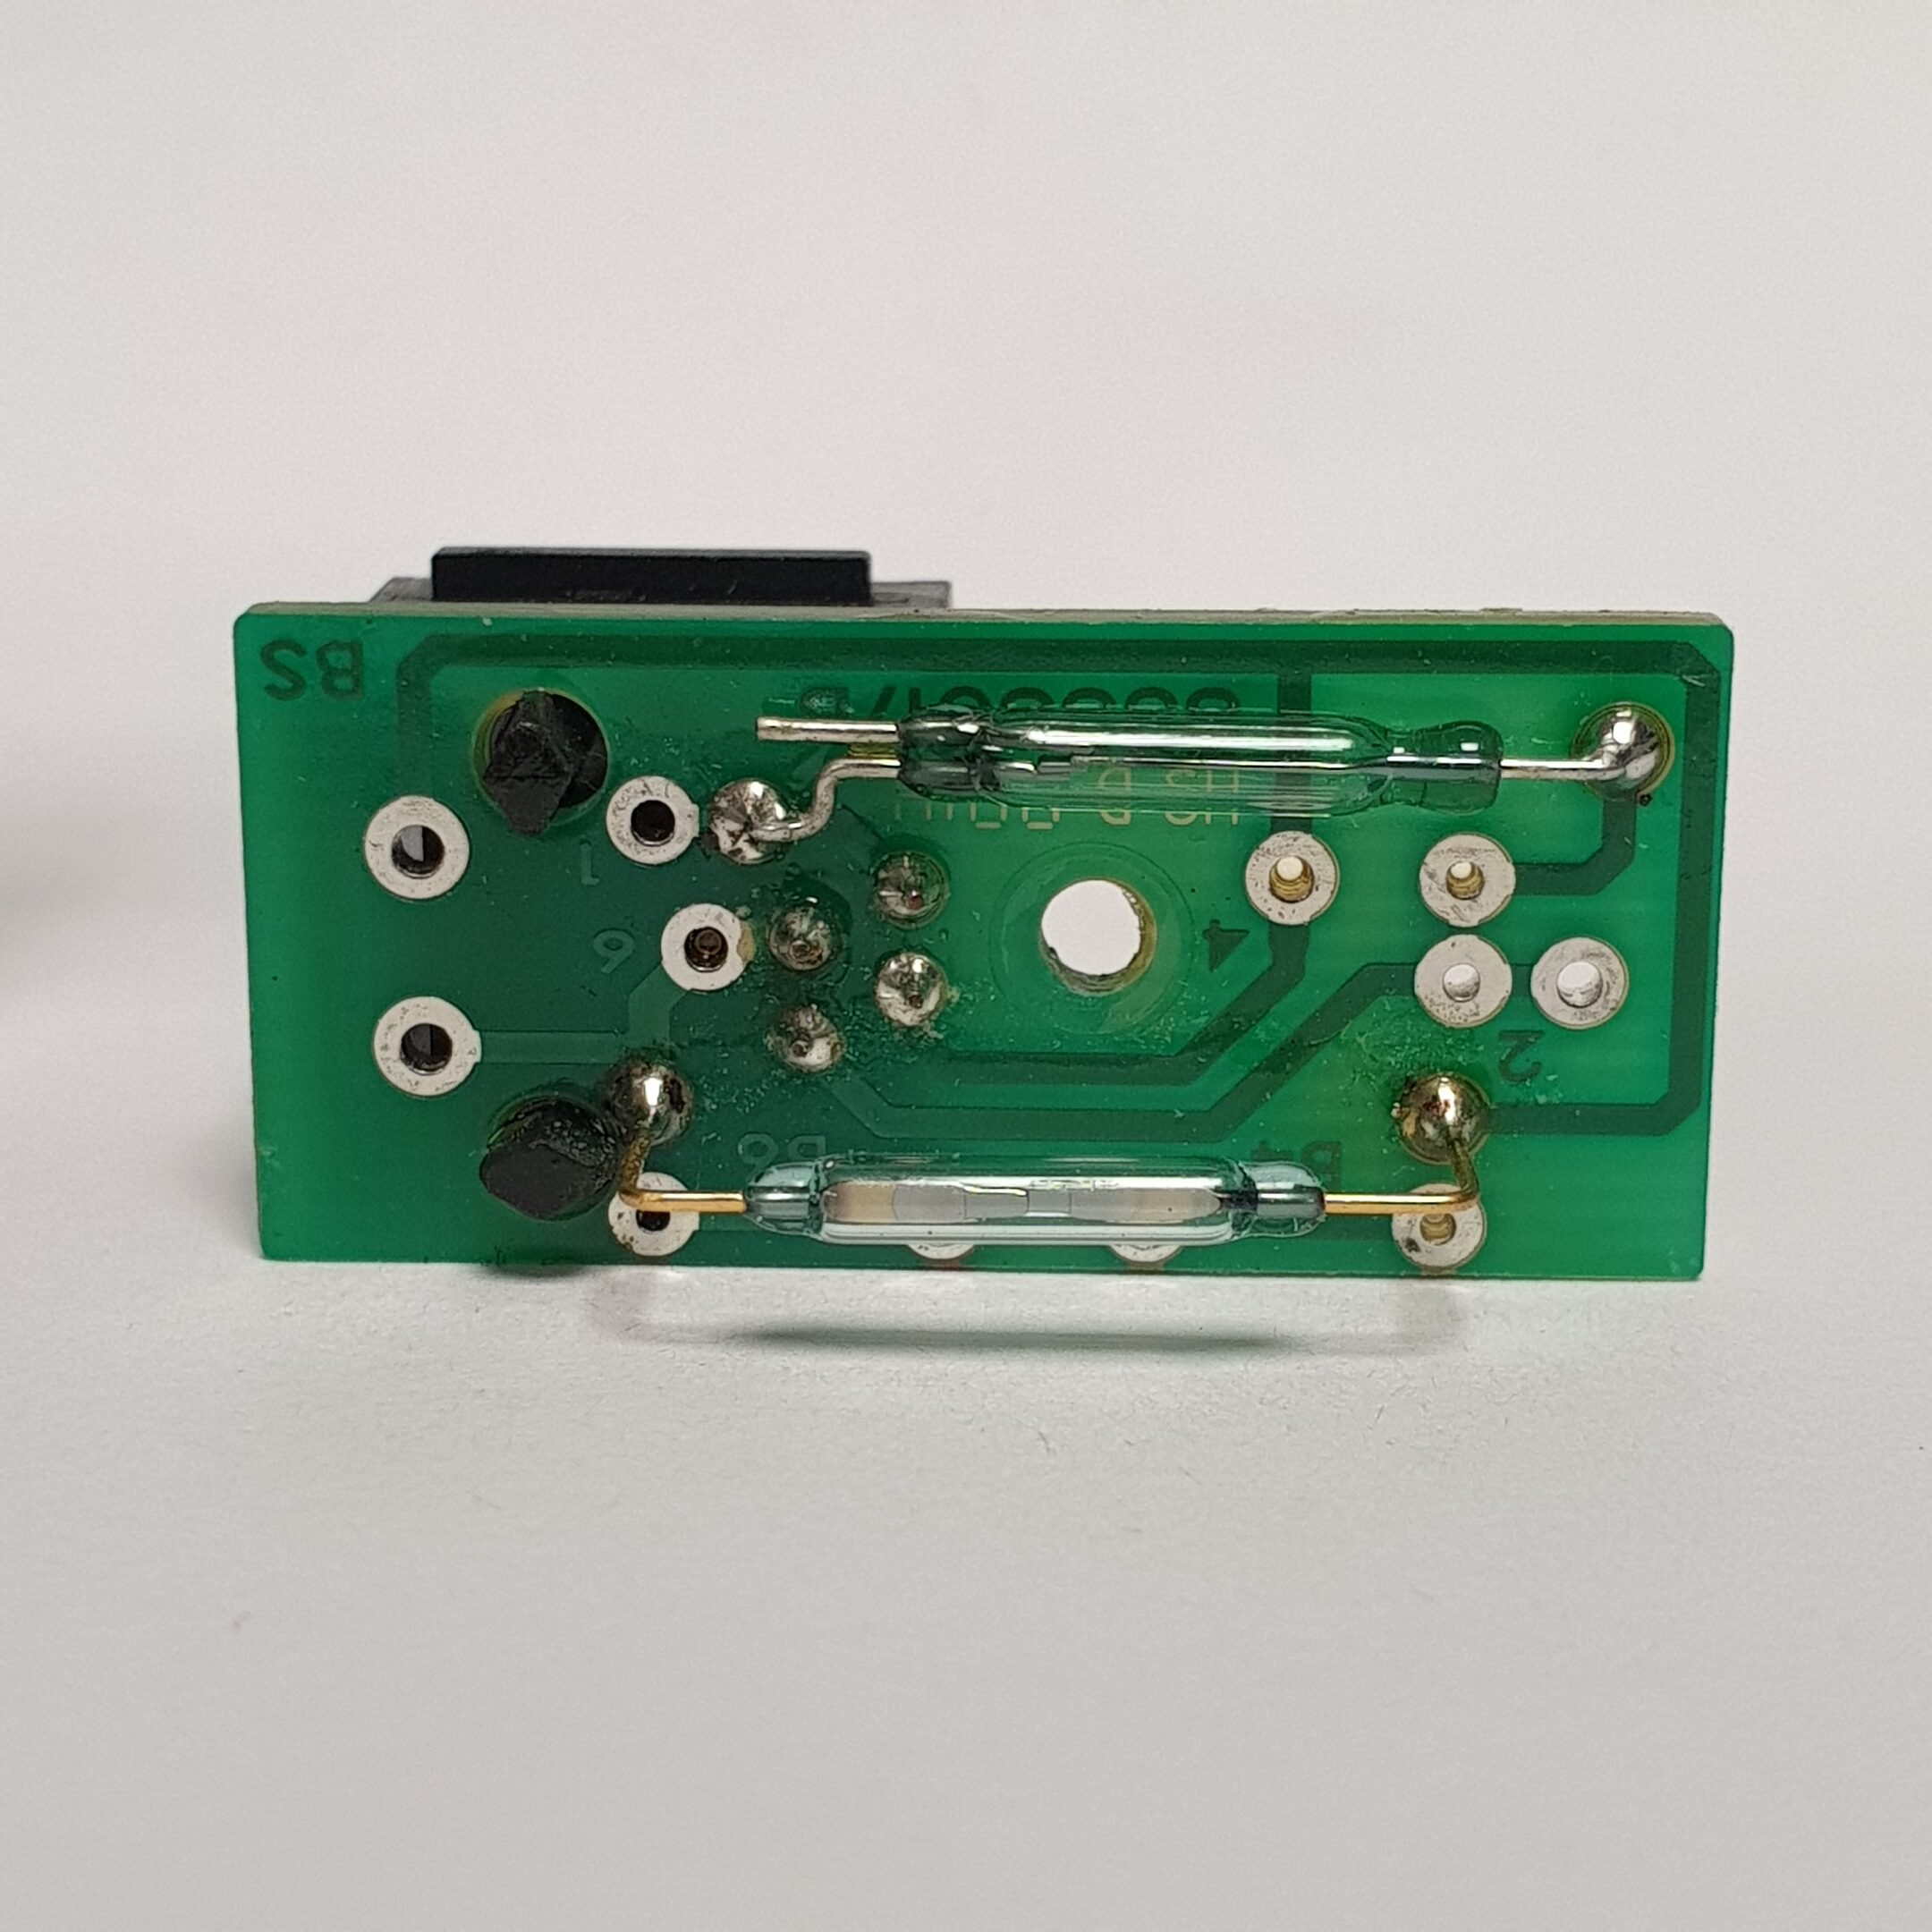 Elster Pulse Module commonly found in diaphragm meters